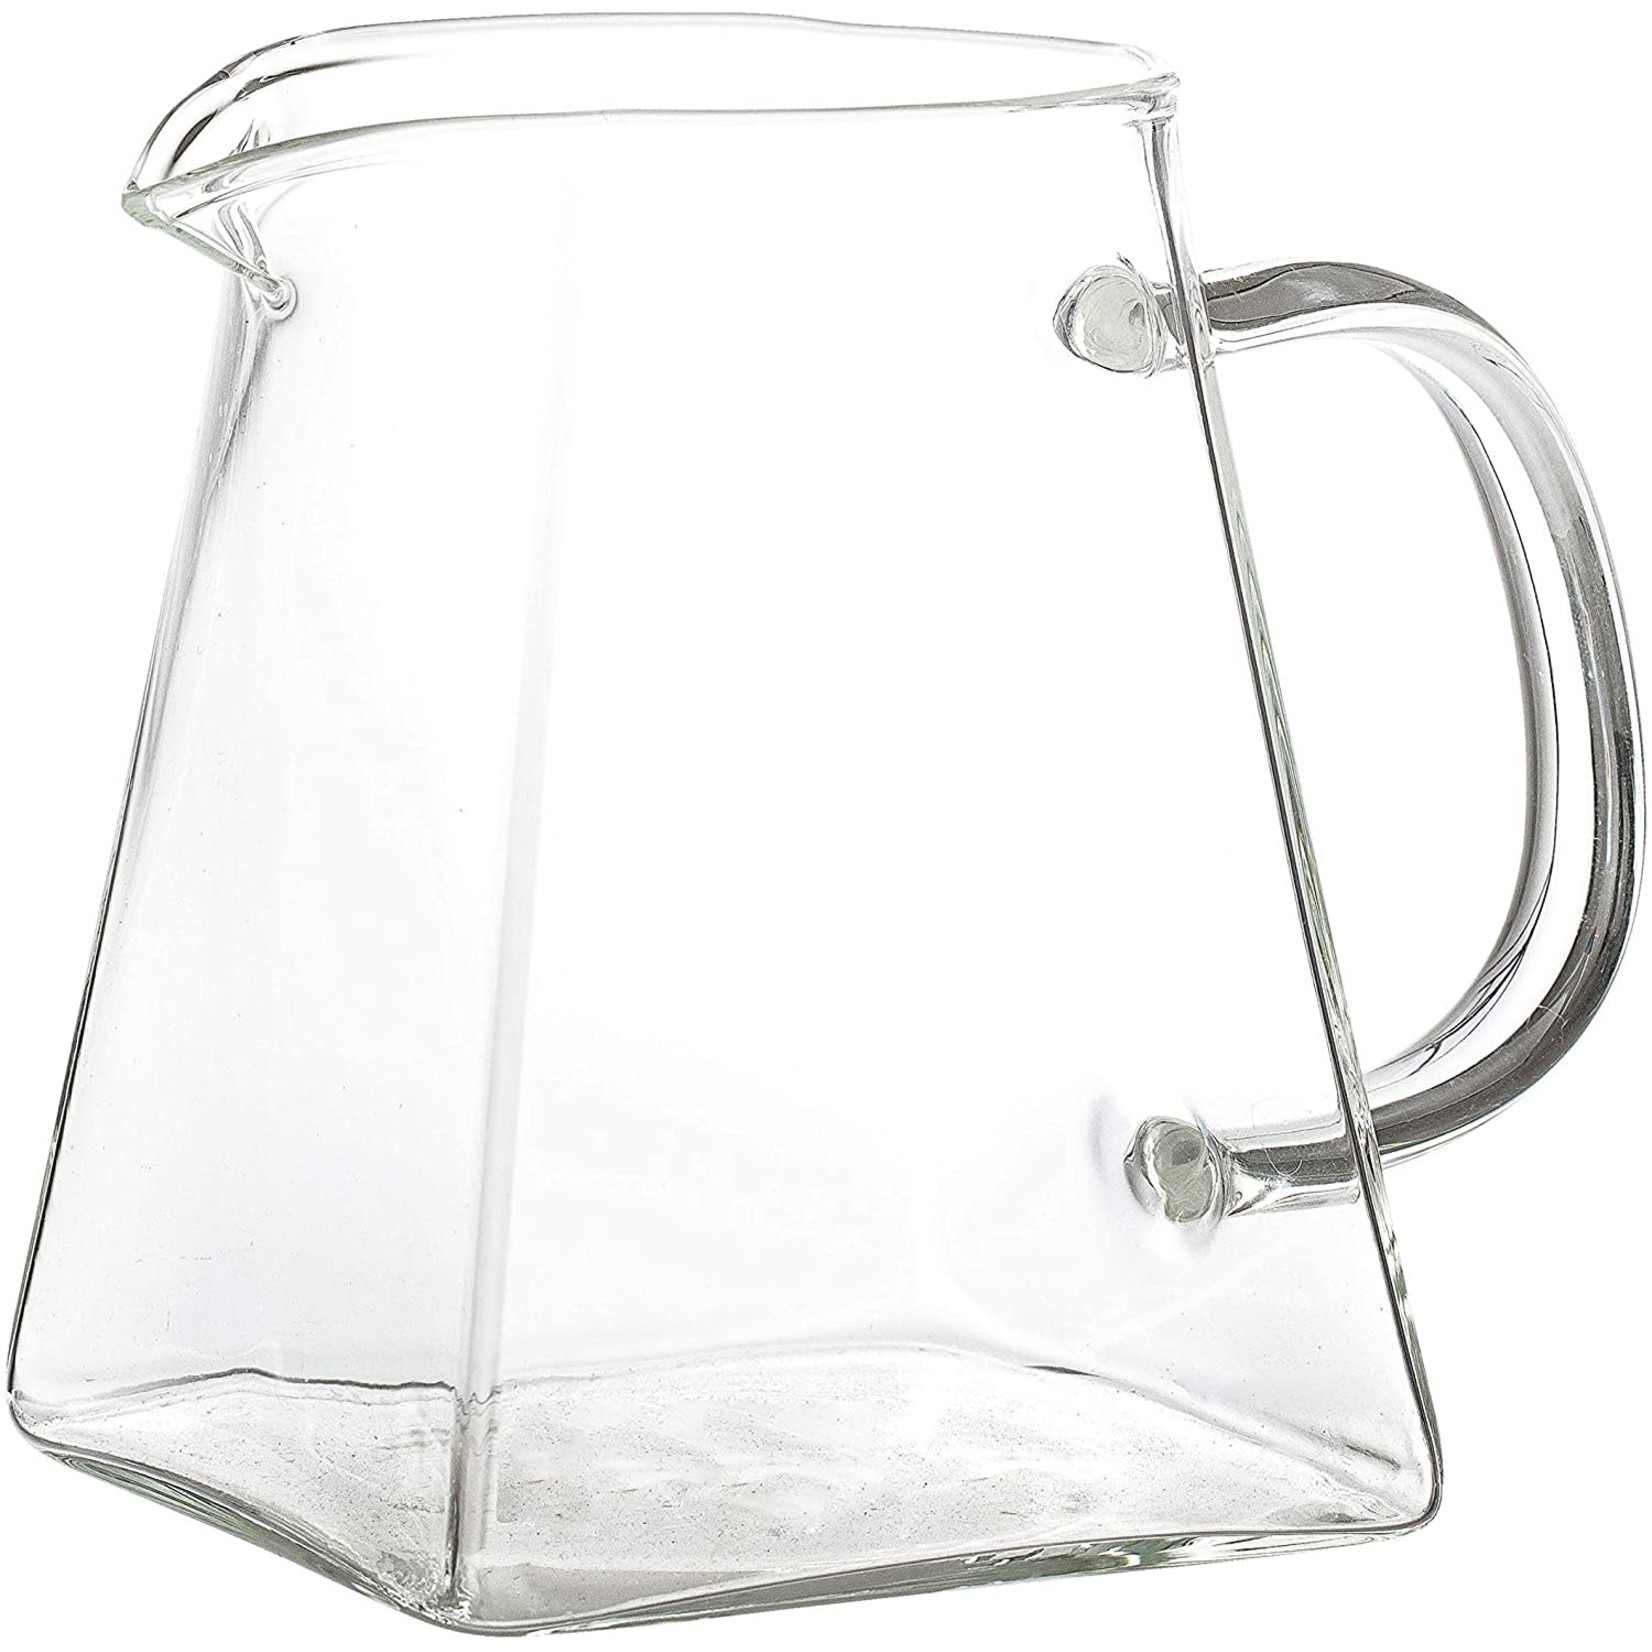 BLOOMINGVILLE GLASS PITCHER W/ SQUARE BASE